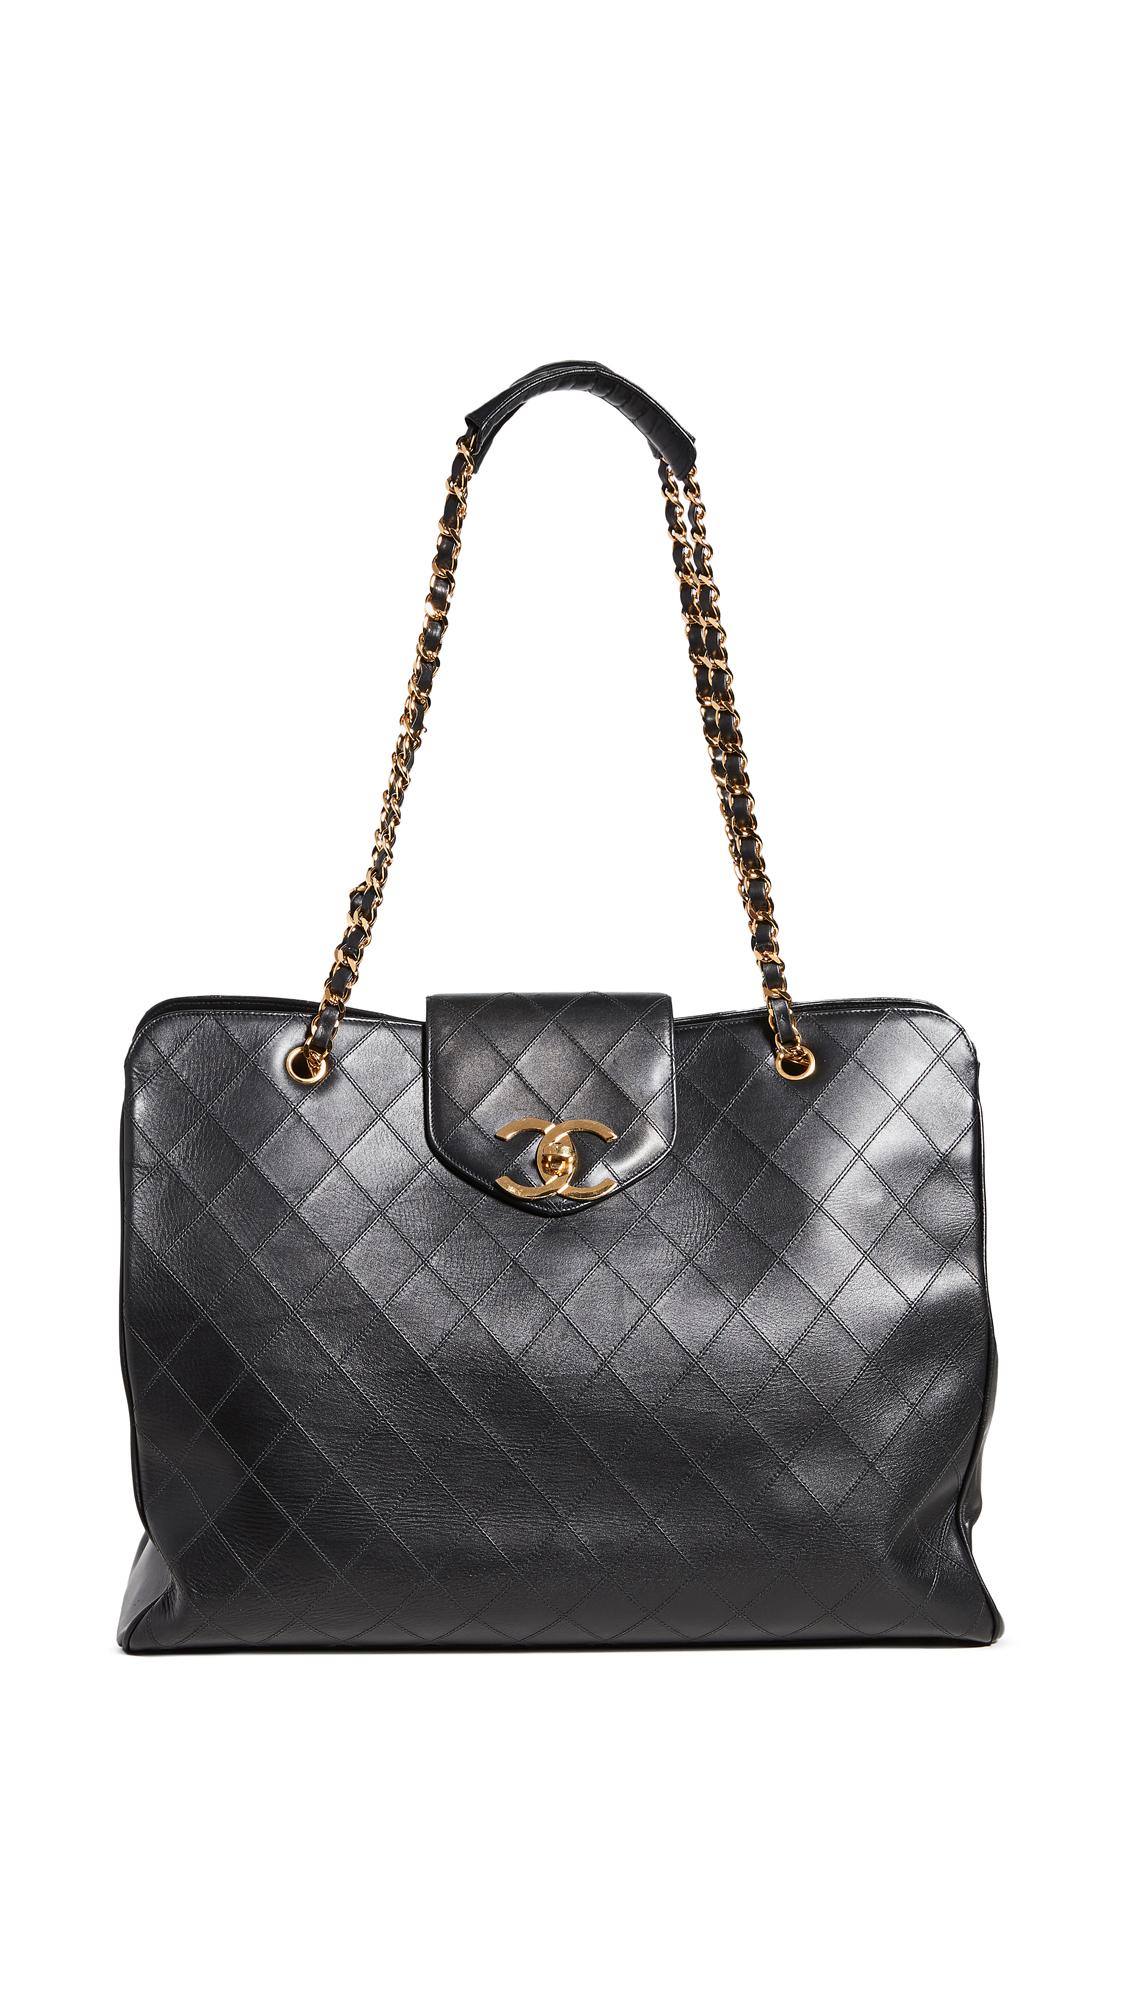 Chanel Terry Cloth Large Beach Tote Black with Gold Hardware